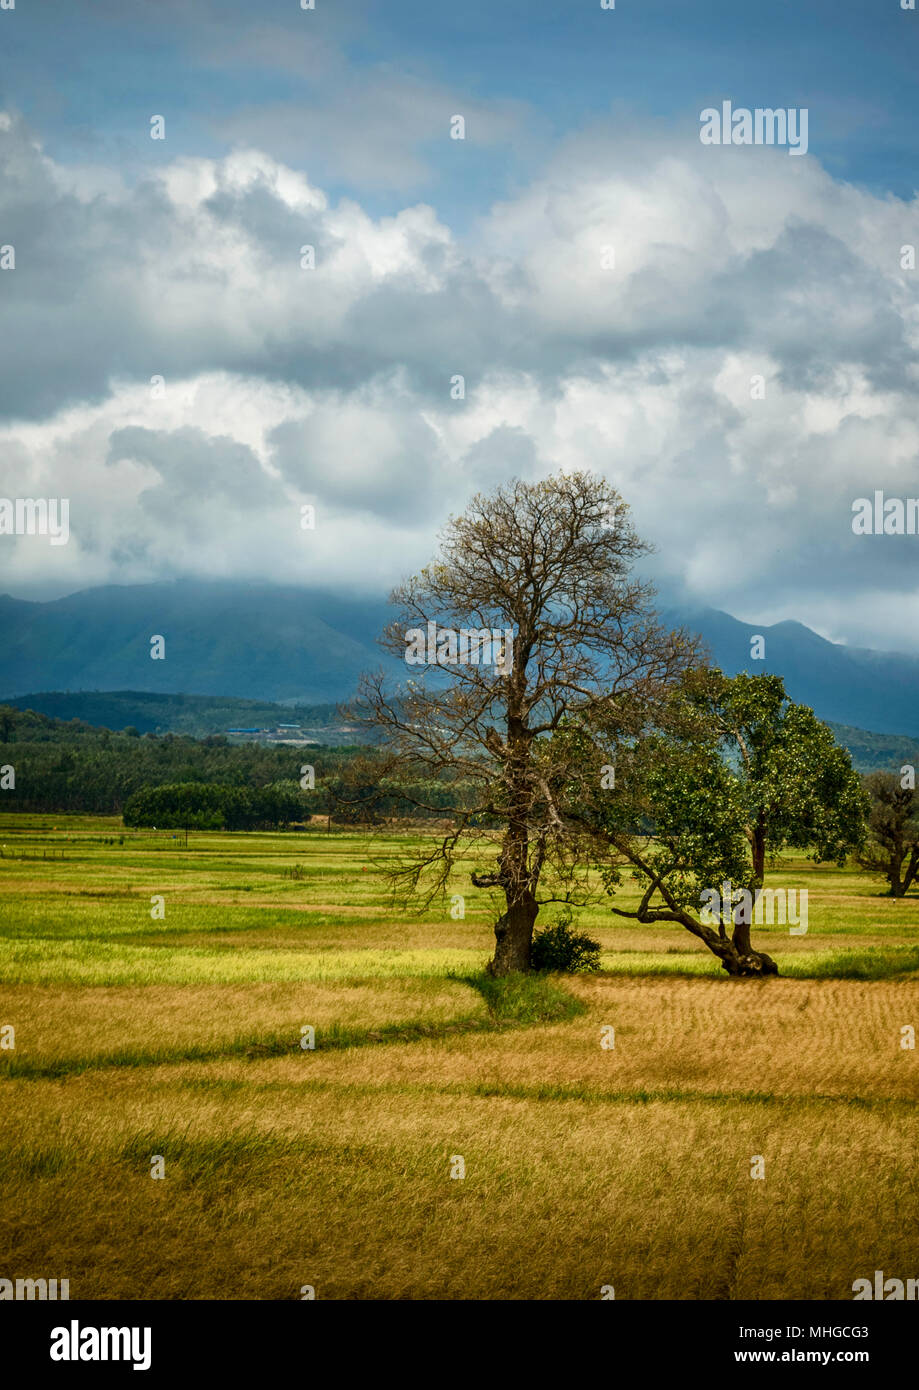 Tree in the middle of a field with mountains in the backdrop Stock Photo